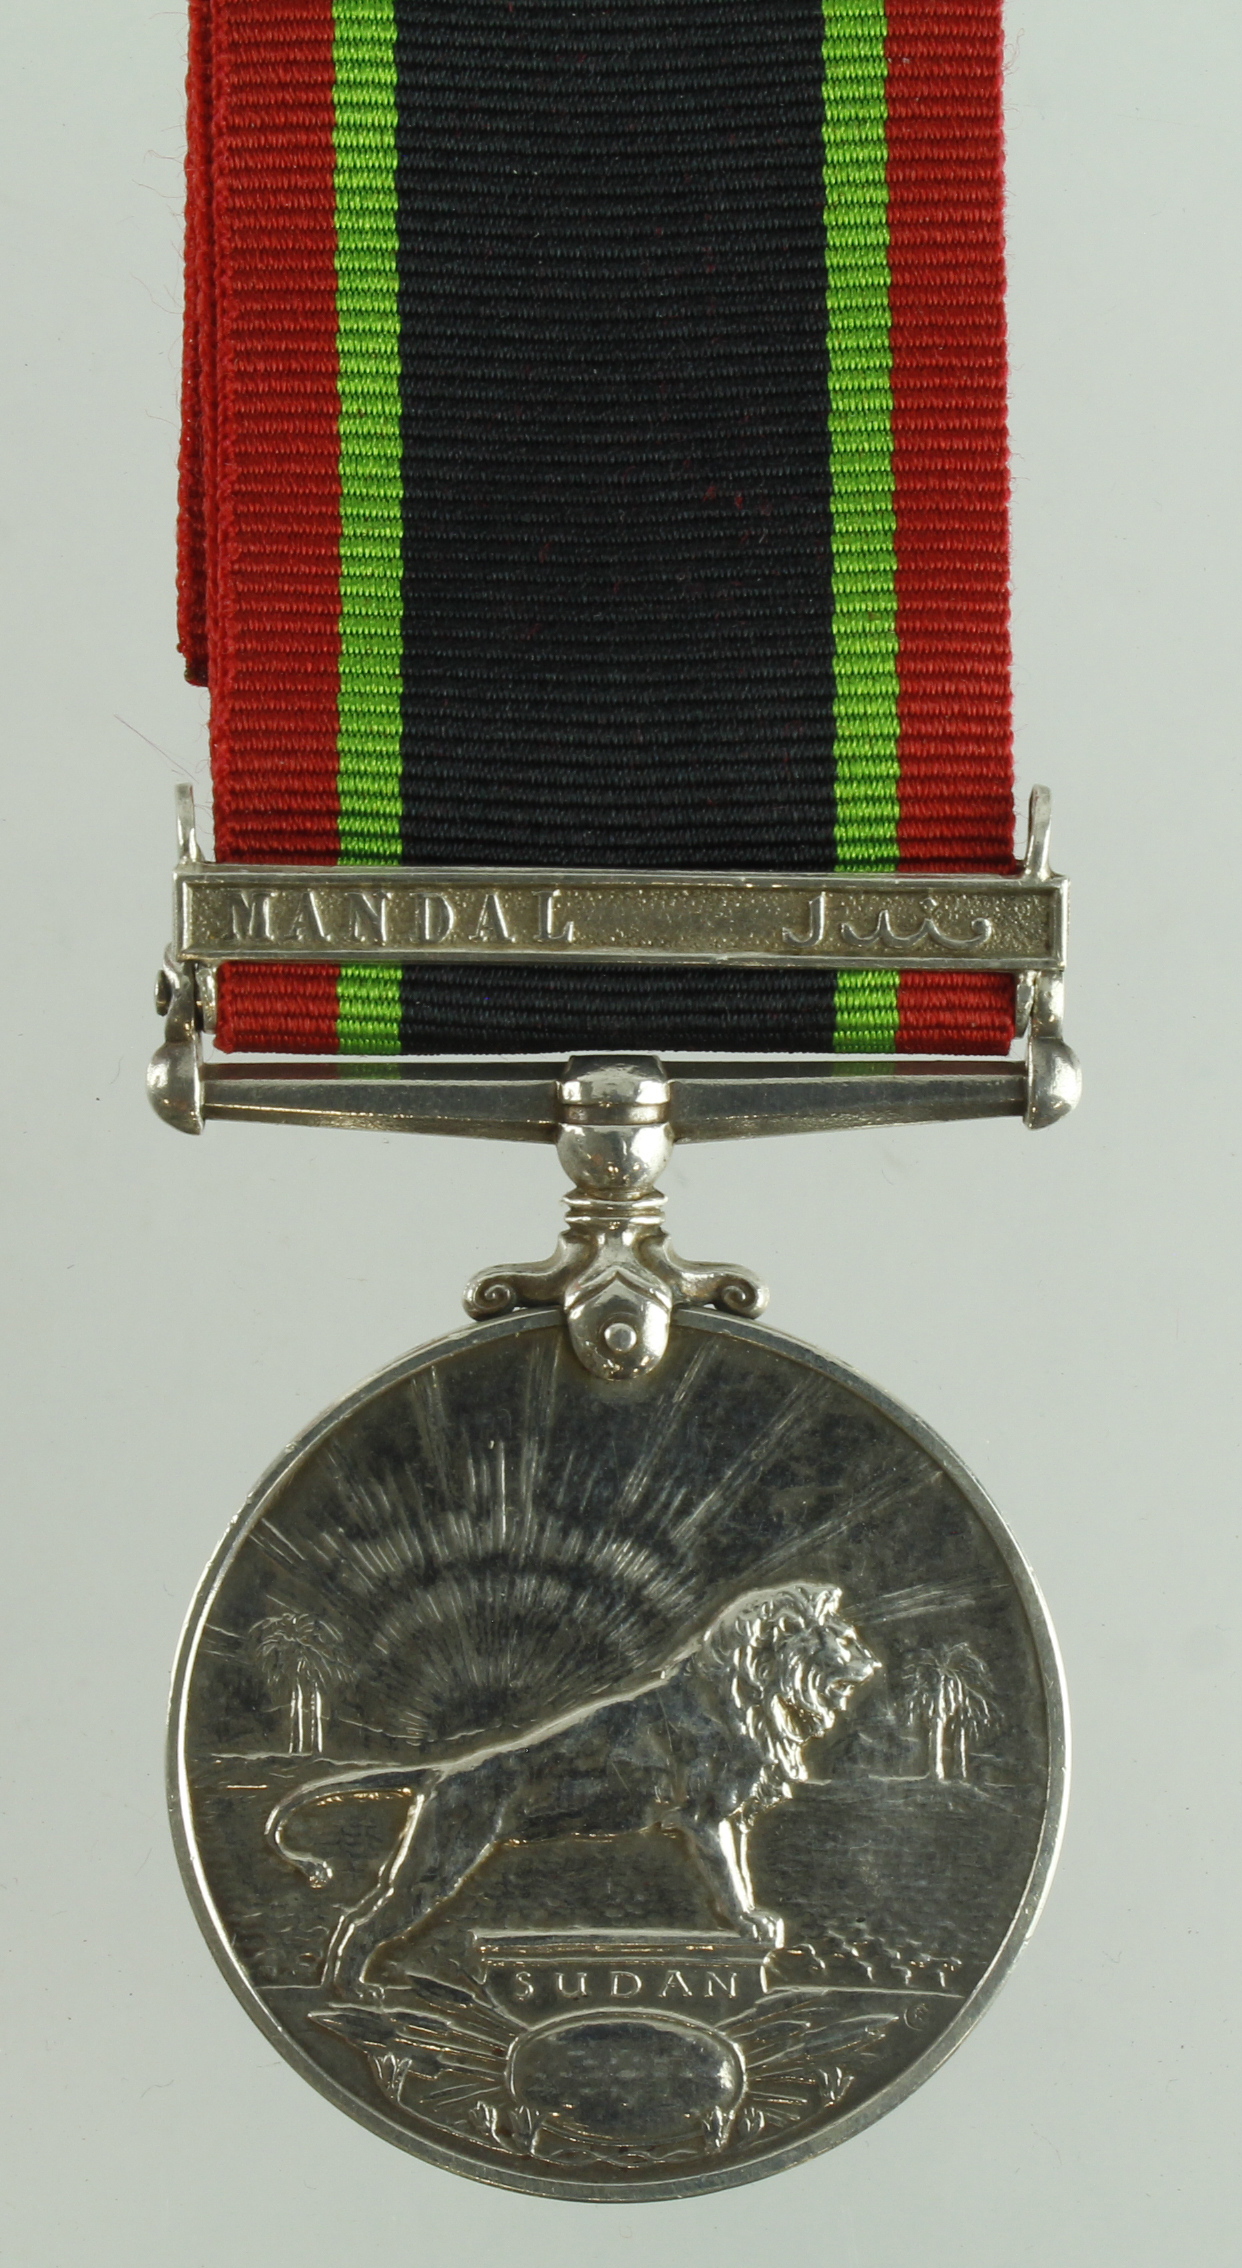 Khedives Sudan Medal 1910 with Mandal clasp, unnamed as issued in silver